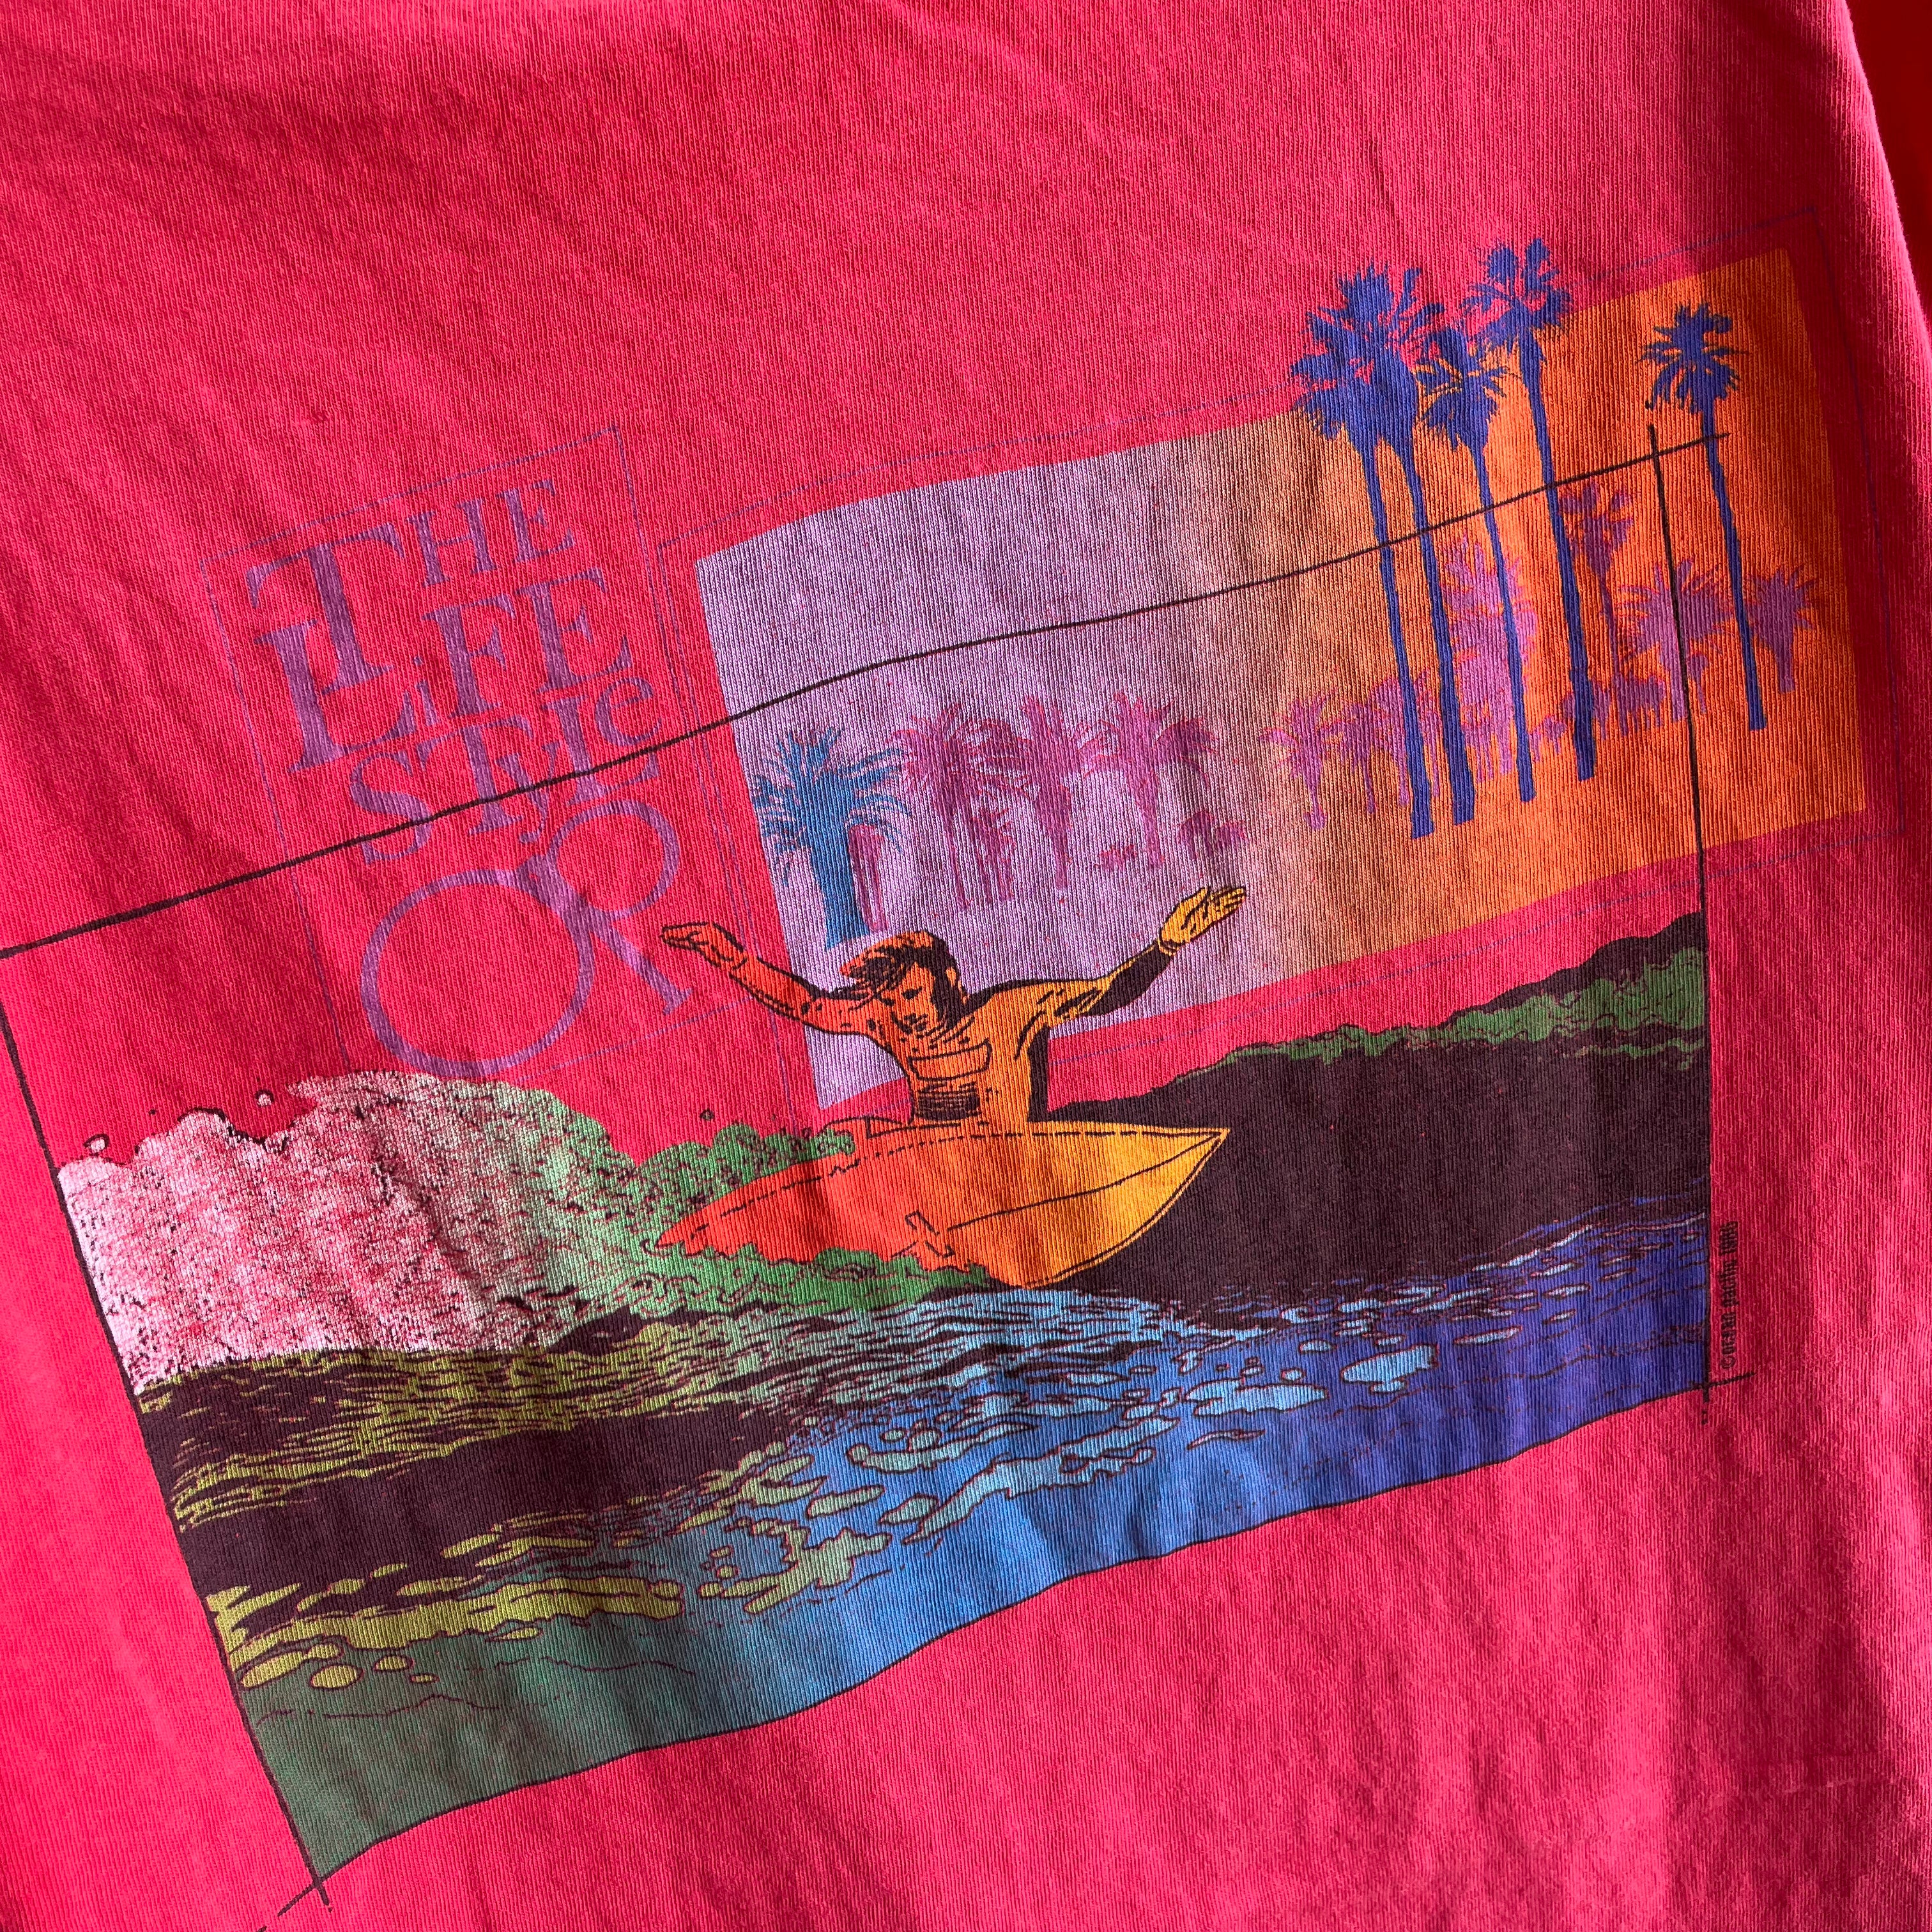 1986 Ocean Pacific Rad Backside Tattered and Worn Surfing T-Shirt